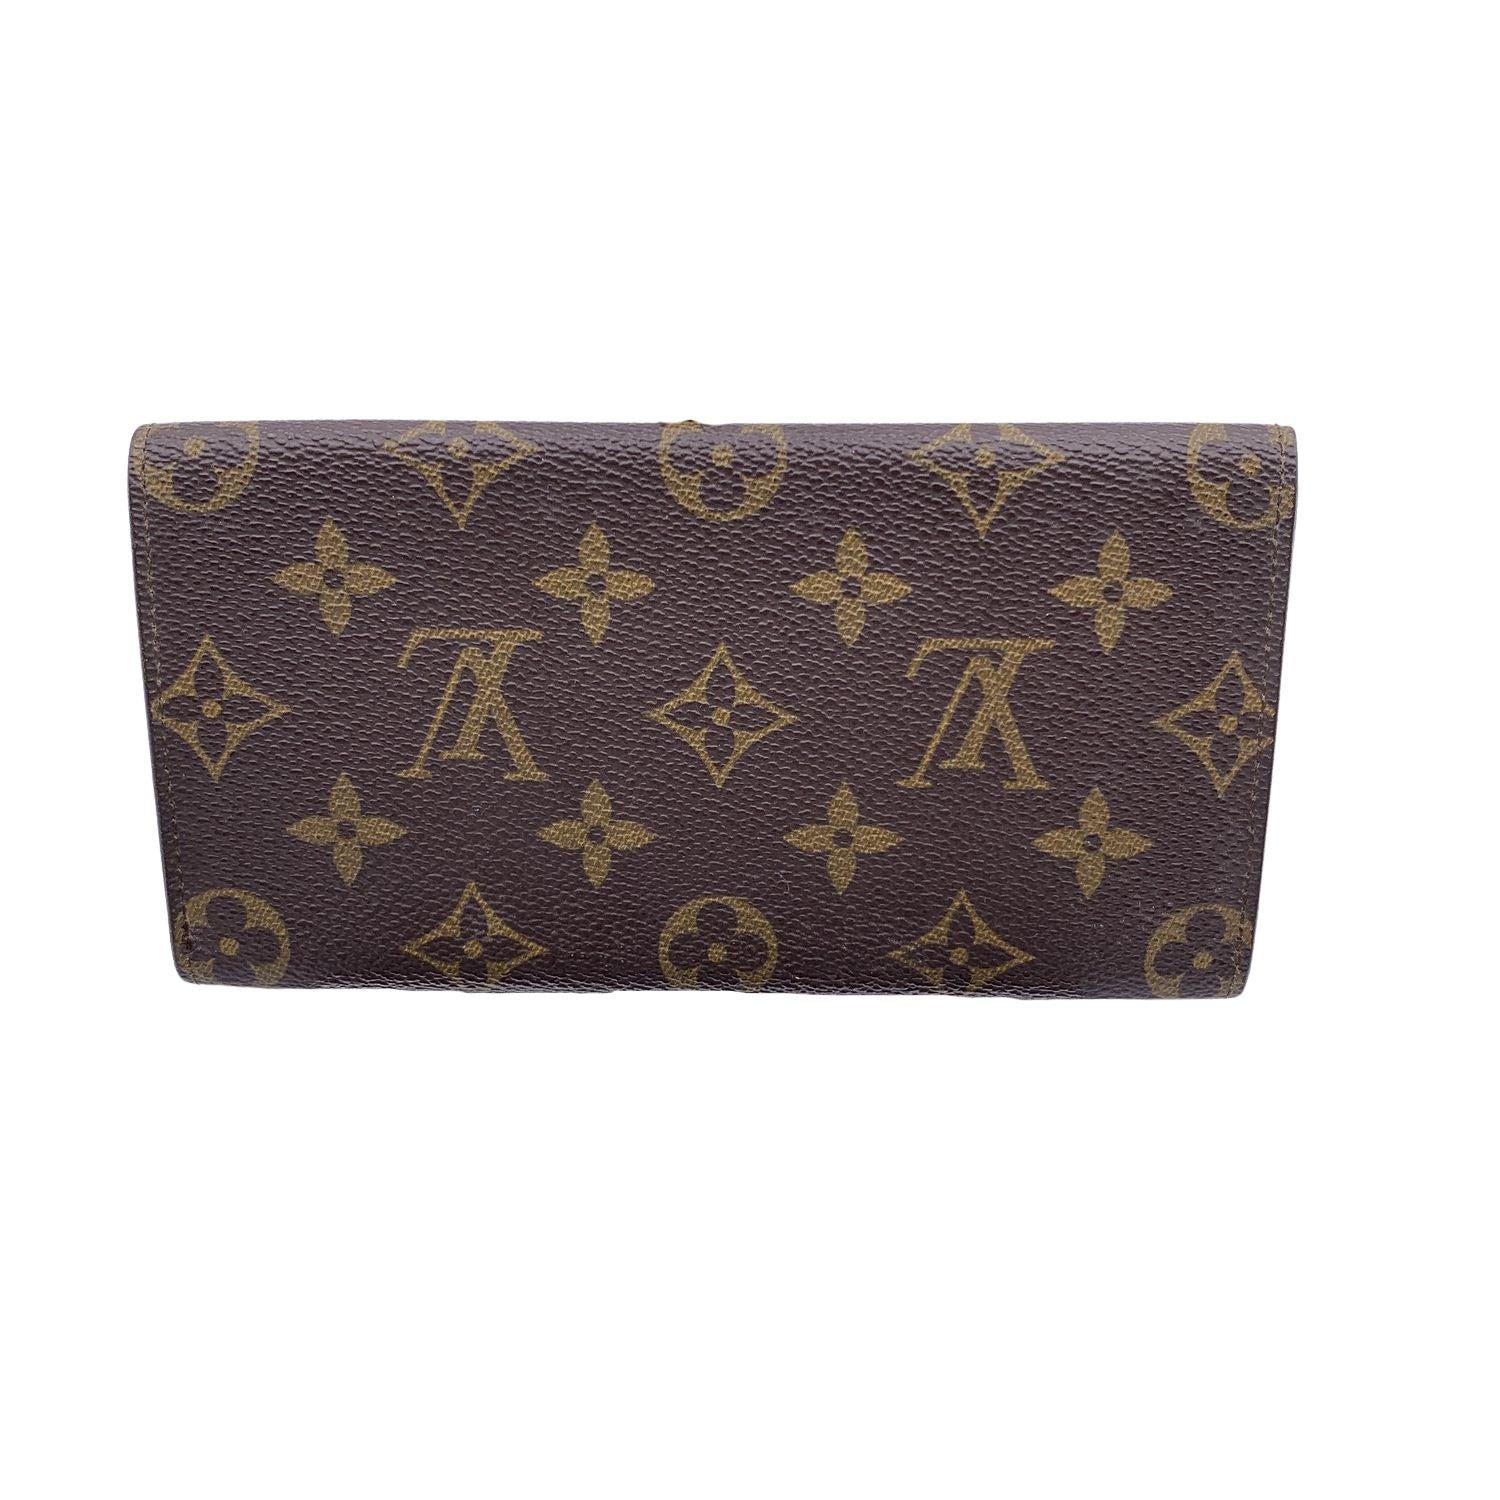 Vintage Louis Vuitton brown monogram canvas Long Bifold Bill Wallet. Flap closure. Leather lining. 1 main compartments inside. 1 open pocket under the flap. 'LOUIS VUITTON Paris - made in France' engraved inside. Condition A - EXCELLENT Gently used.